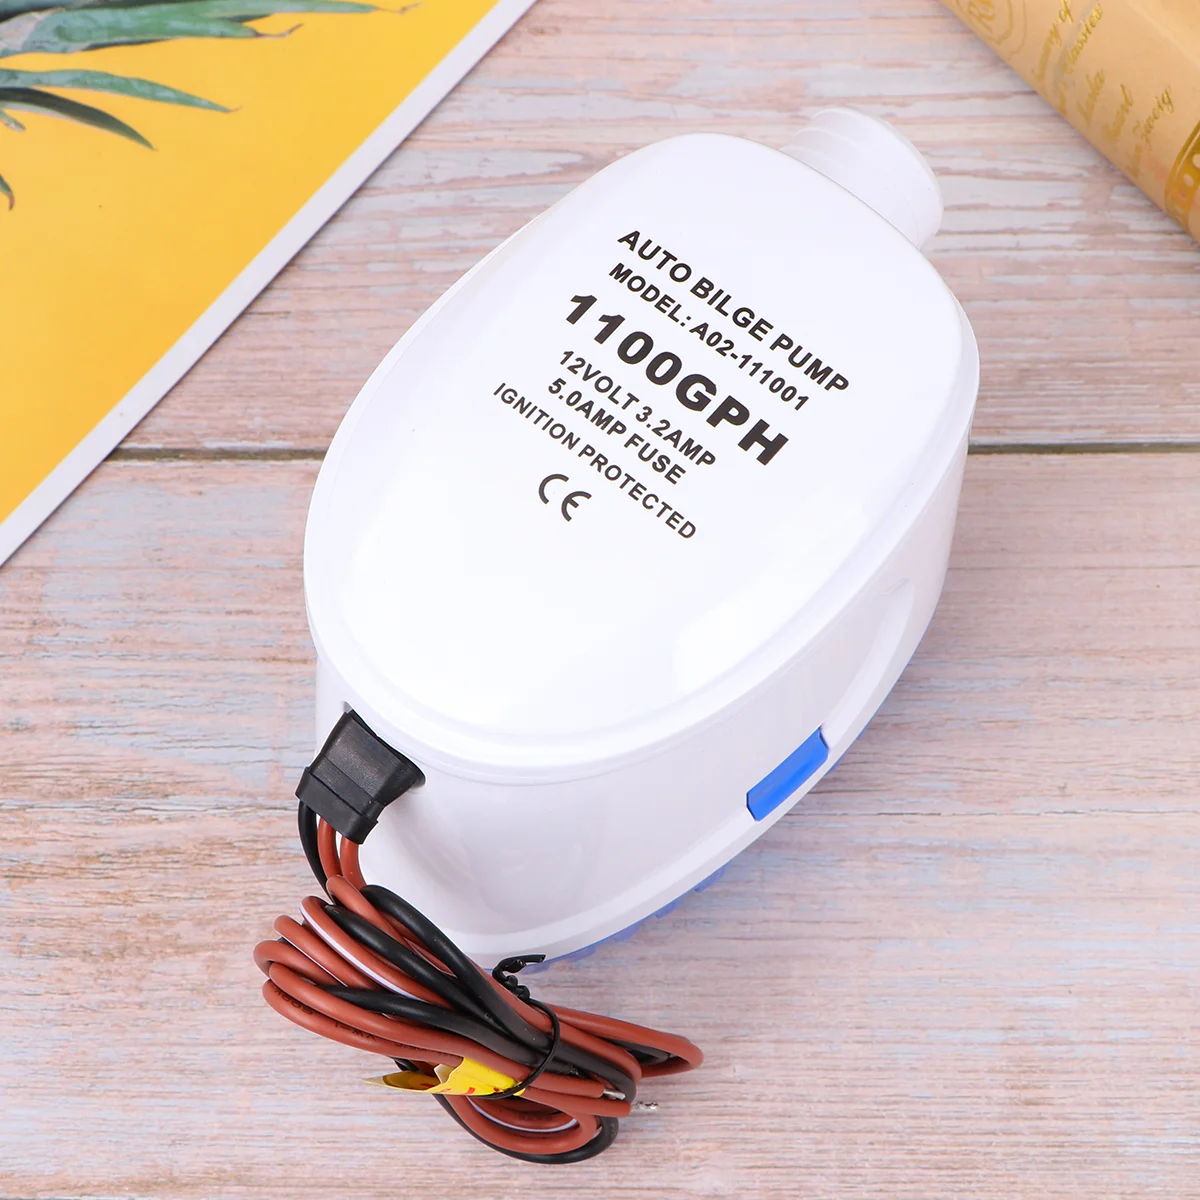 

12V 1100GPH Boat Marine Automatic Submersible Auto Switch Bilge Water Pump for Caravan Camping Marine Fishing Boat Small